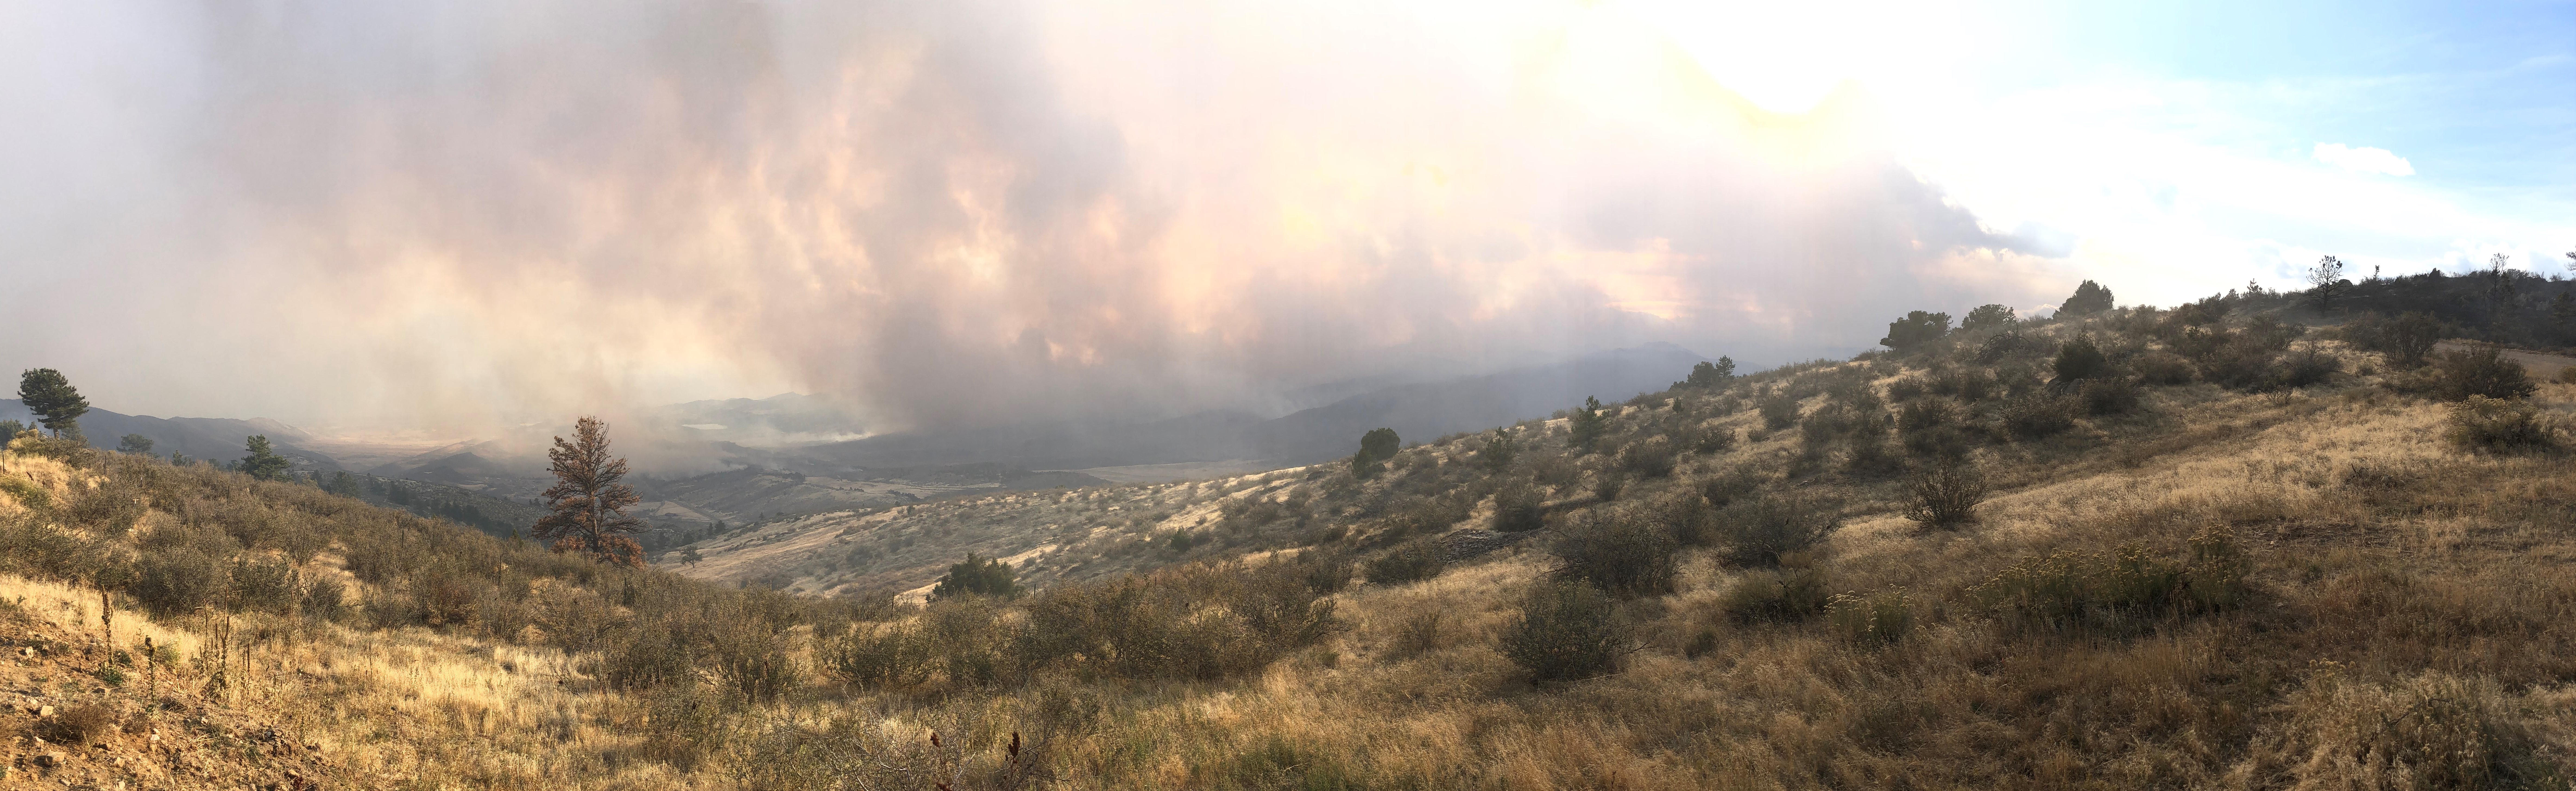 Photo of a wildfire creating huge clouds of dark smoke as it burns the mountain range along the horizon.